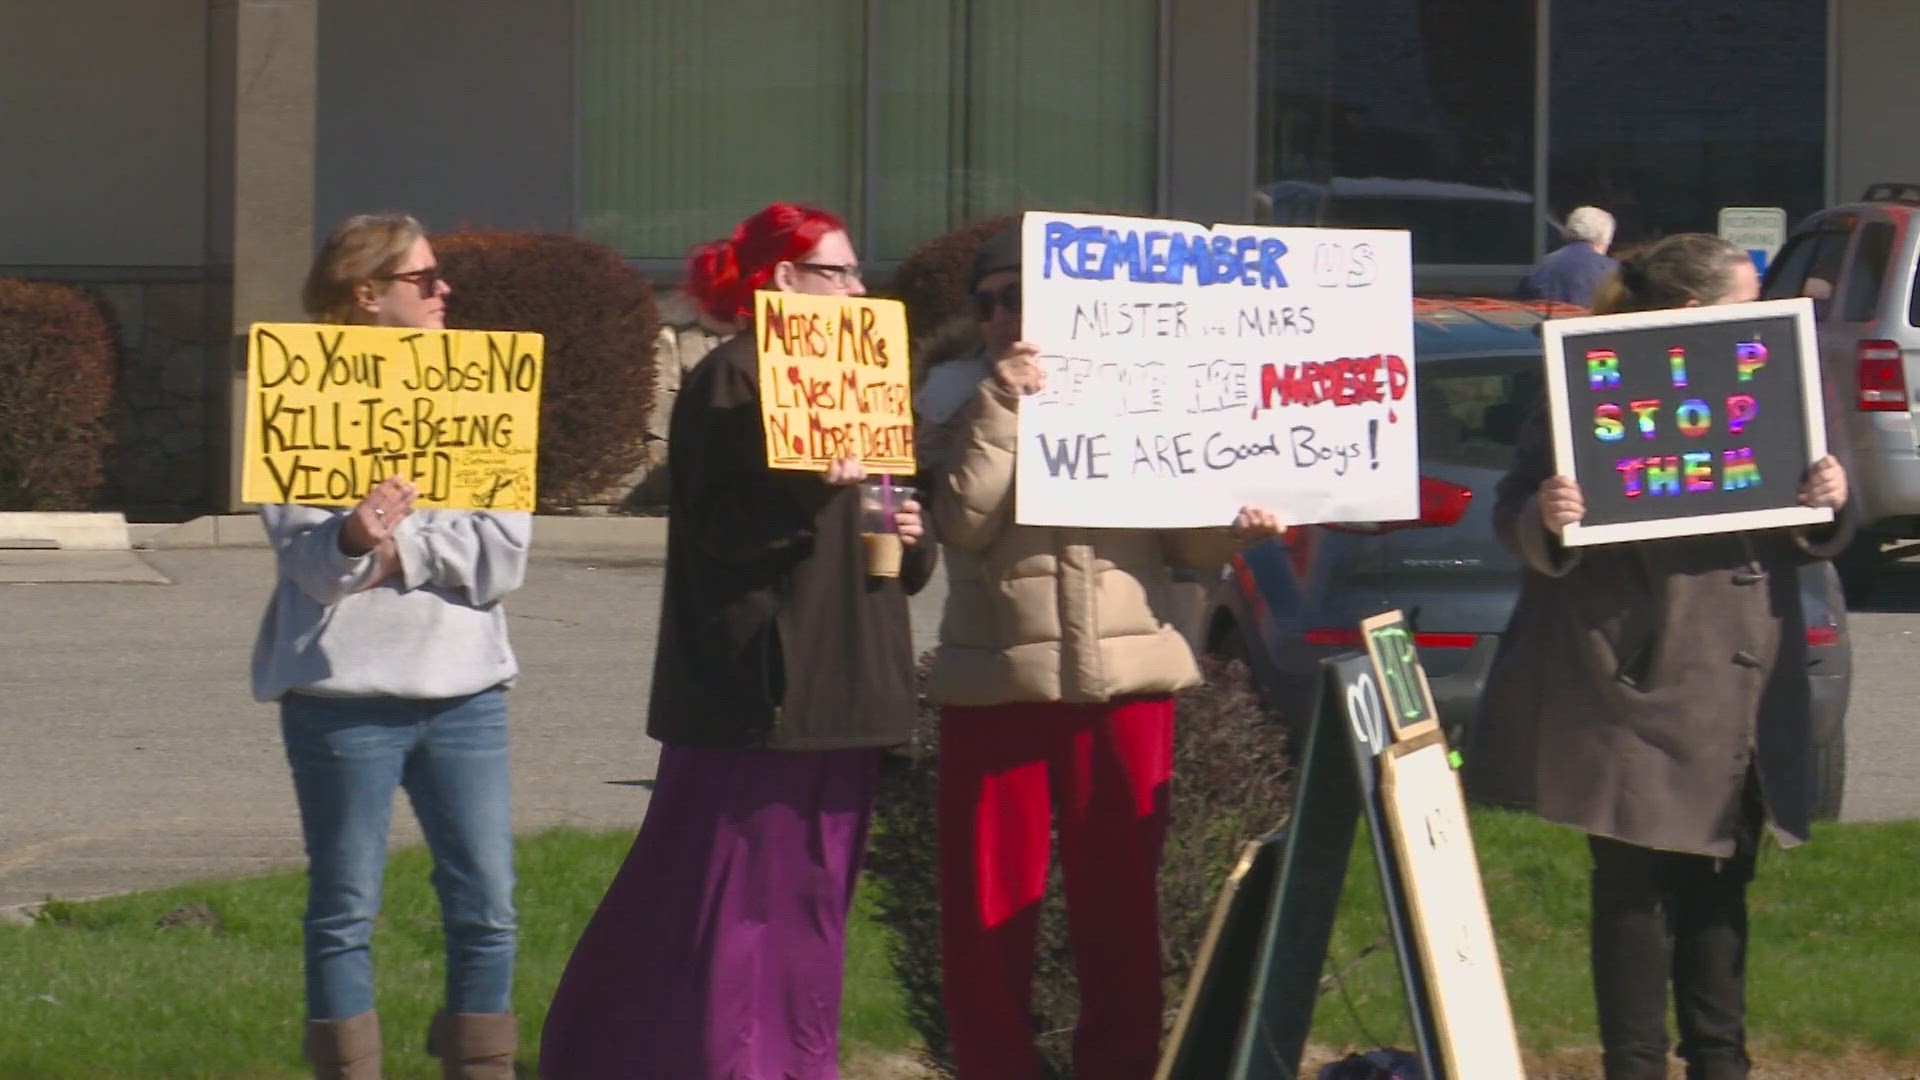 Animal advocates who gathered outside SCRAPS Monday told KREM 2 they are worried about the number of dogs being put down and the lack of transparency from SCRAPS.